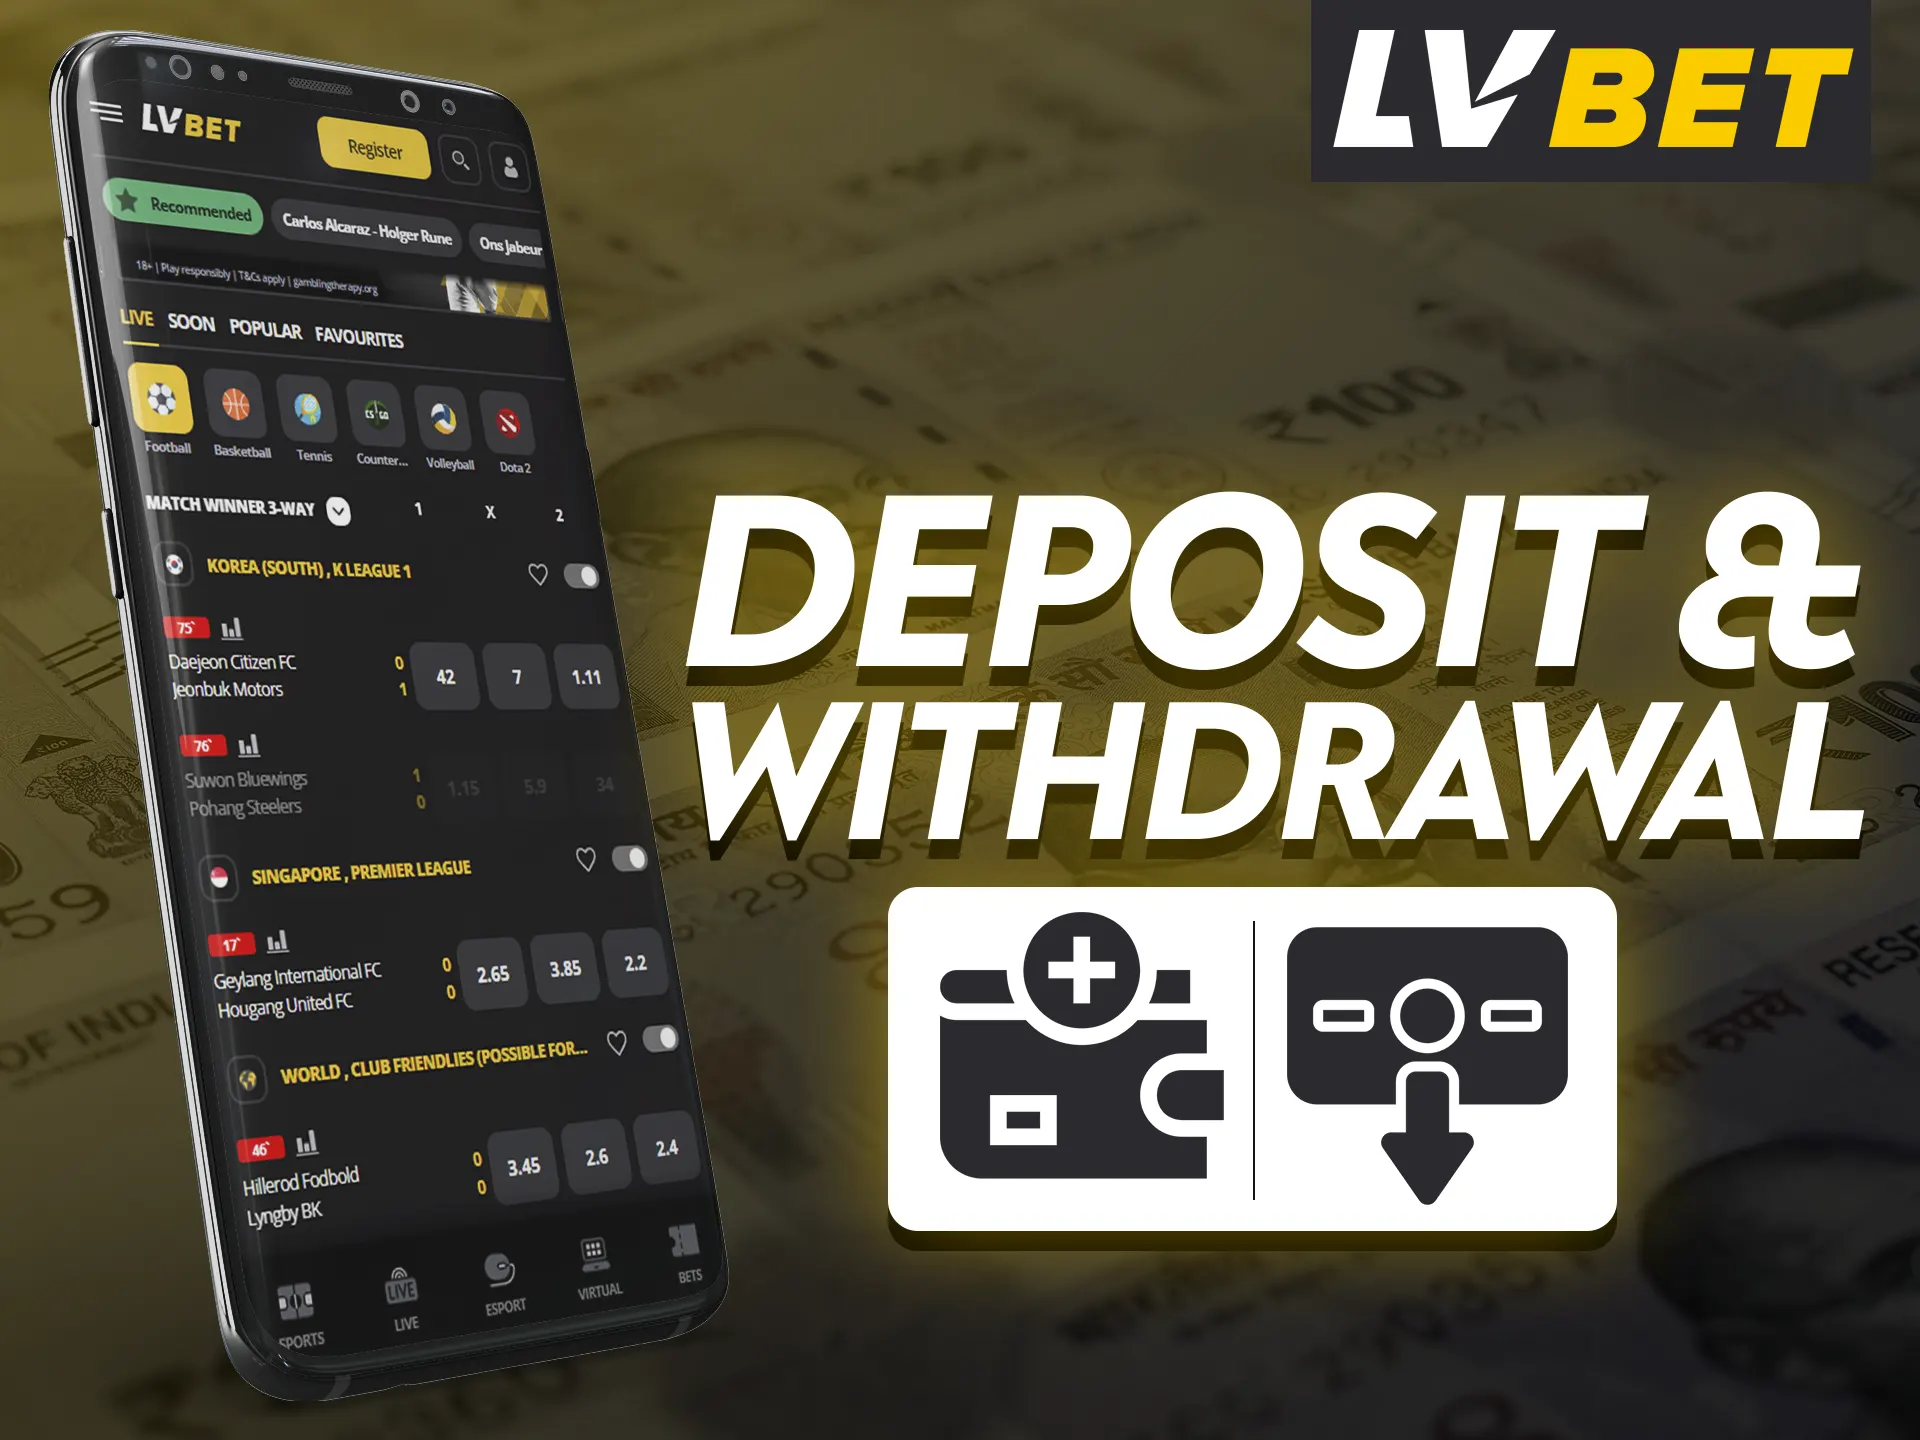 There are various deposit and withdrawal methods available in the LV Bet app.